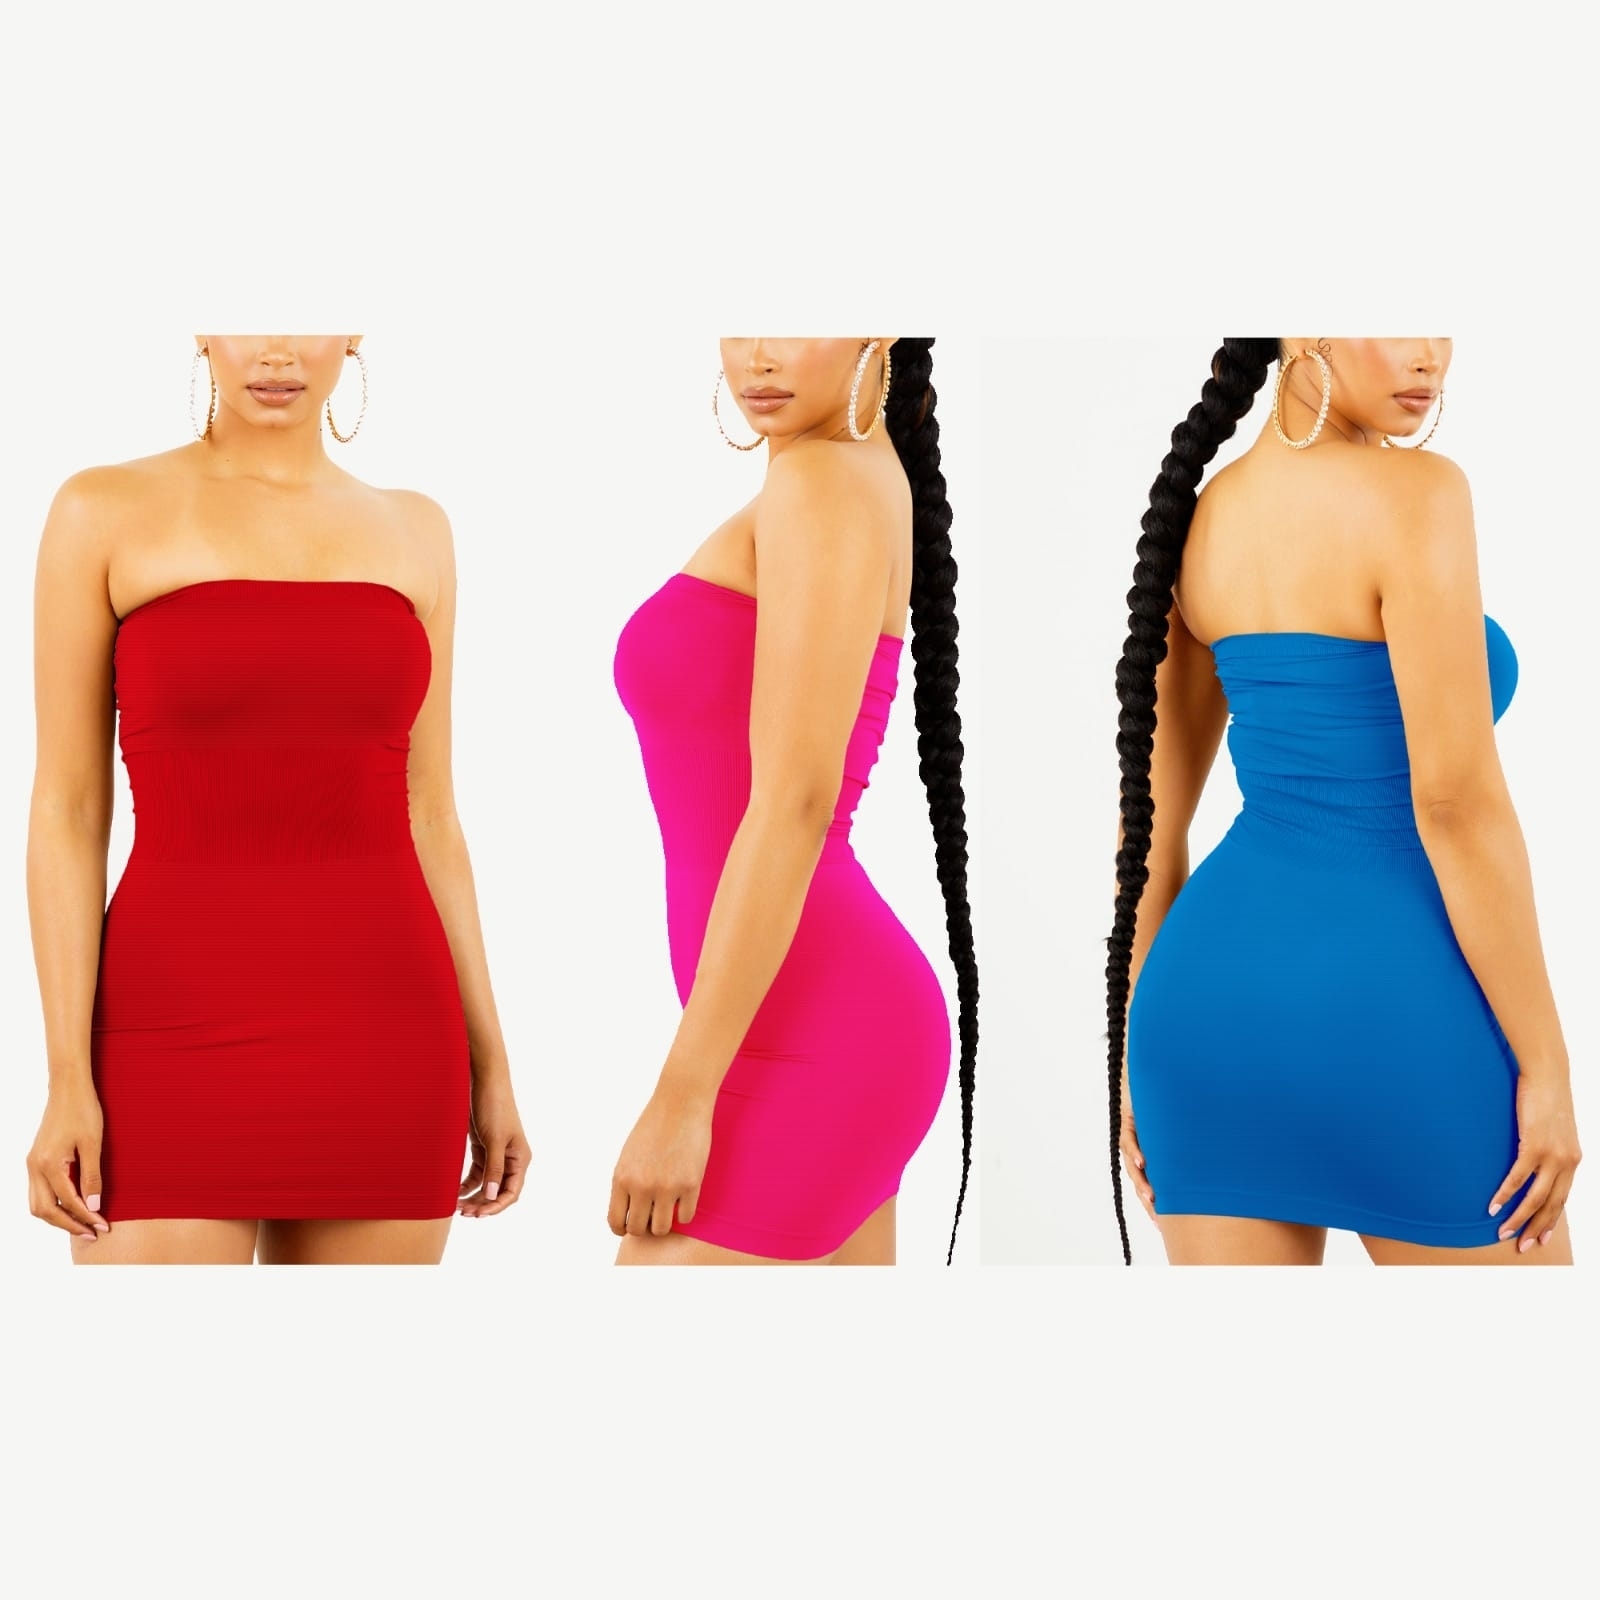 2-Pack Women's Strapless Stretchy Tight Fit Seamless Body Con Mini Tube Top Dress - BLUE, 1XL